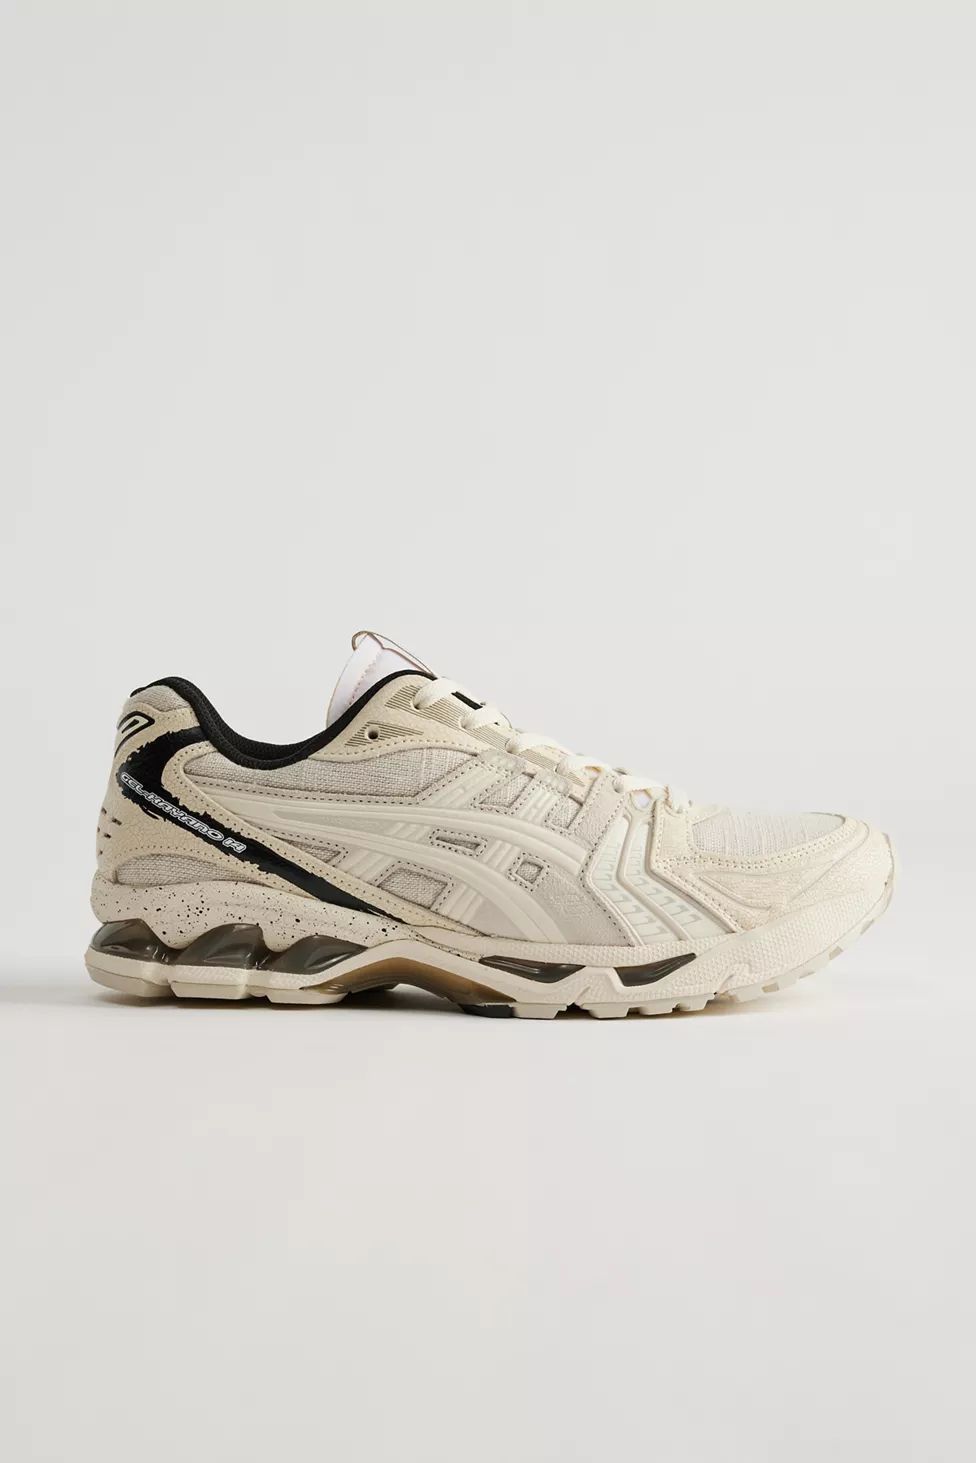 ASICS GEL-Kayano 14 Premium Sneaker | Urban Outfitters (US and RoW)